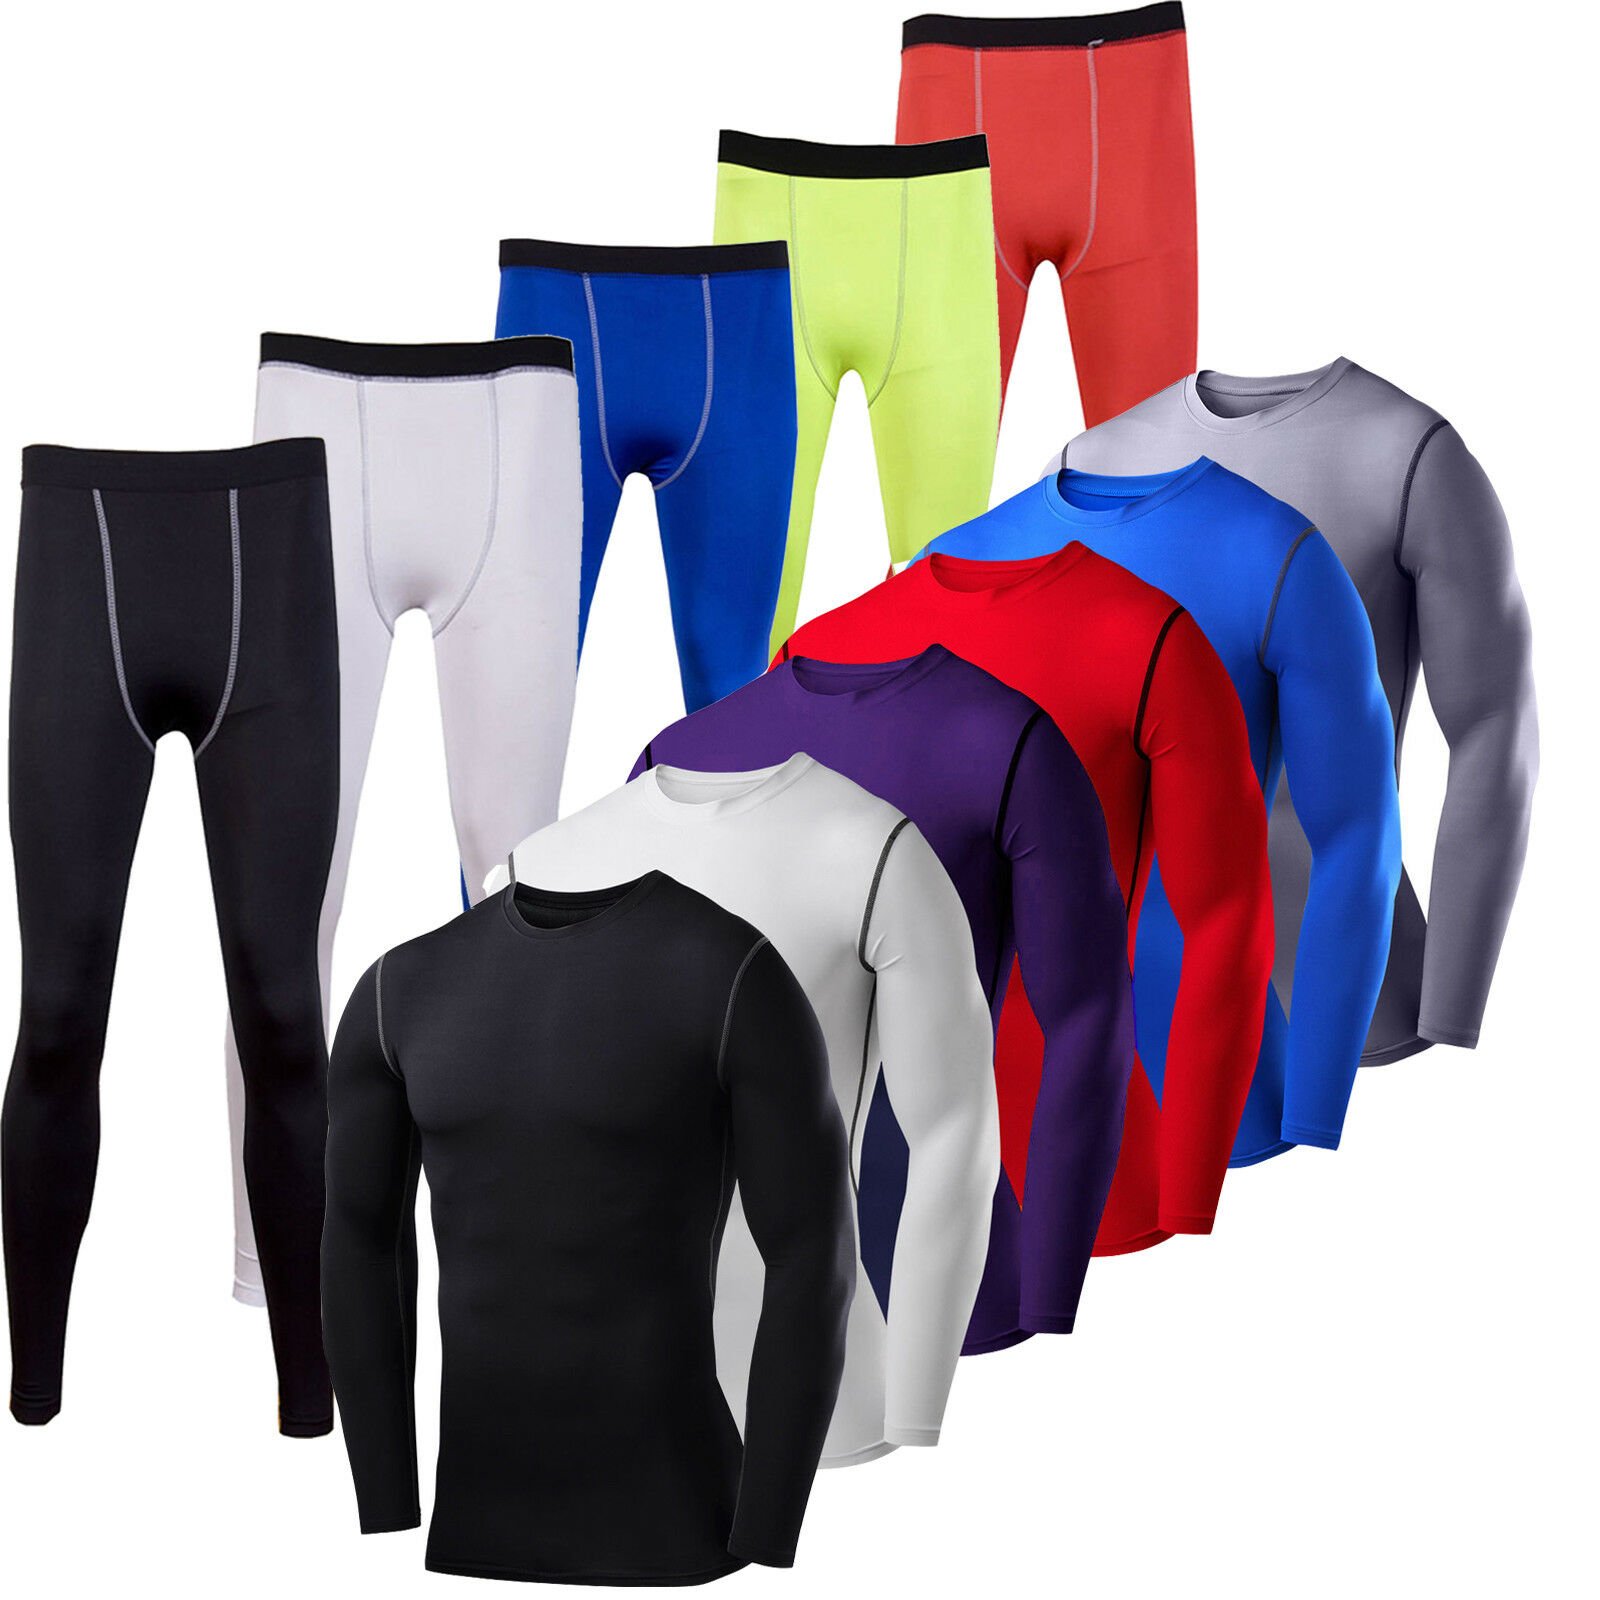 Mens Compression Body Armour Base Layer Gym Thermal Shirt Tops Leggings Pants 10